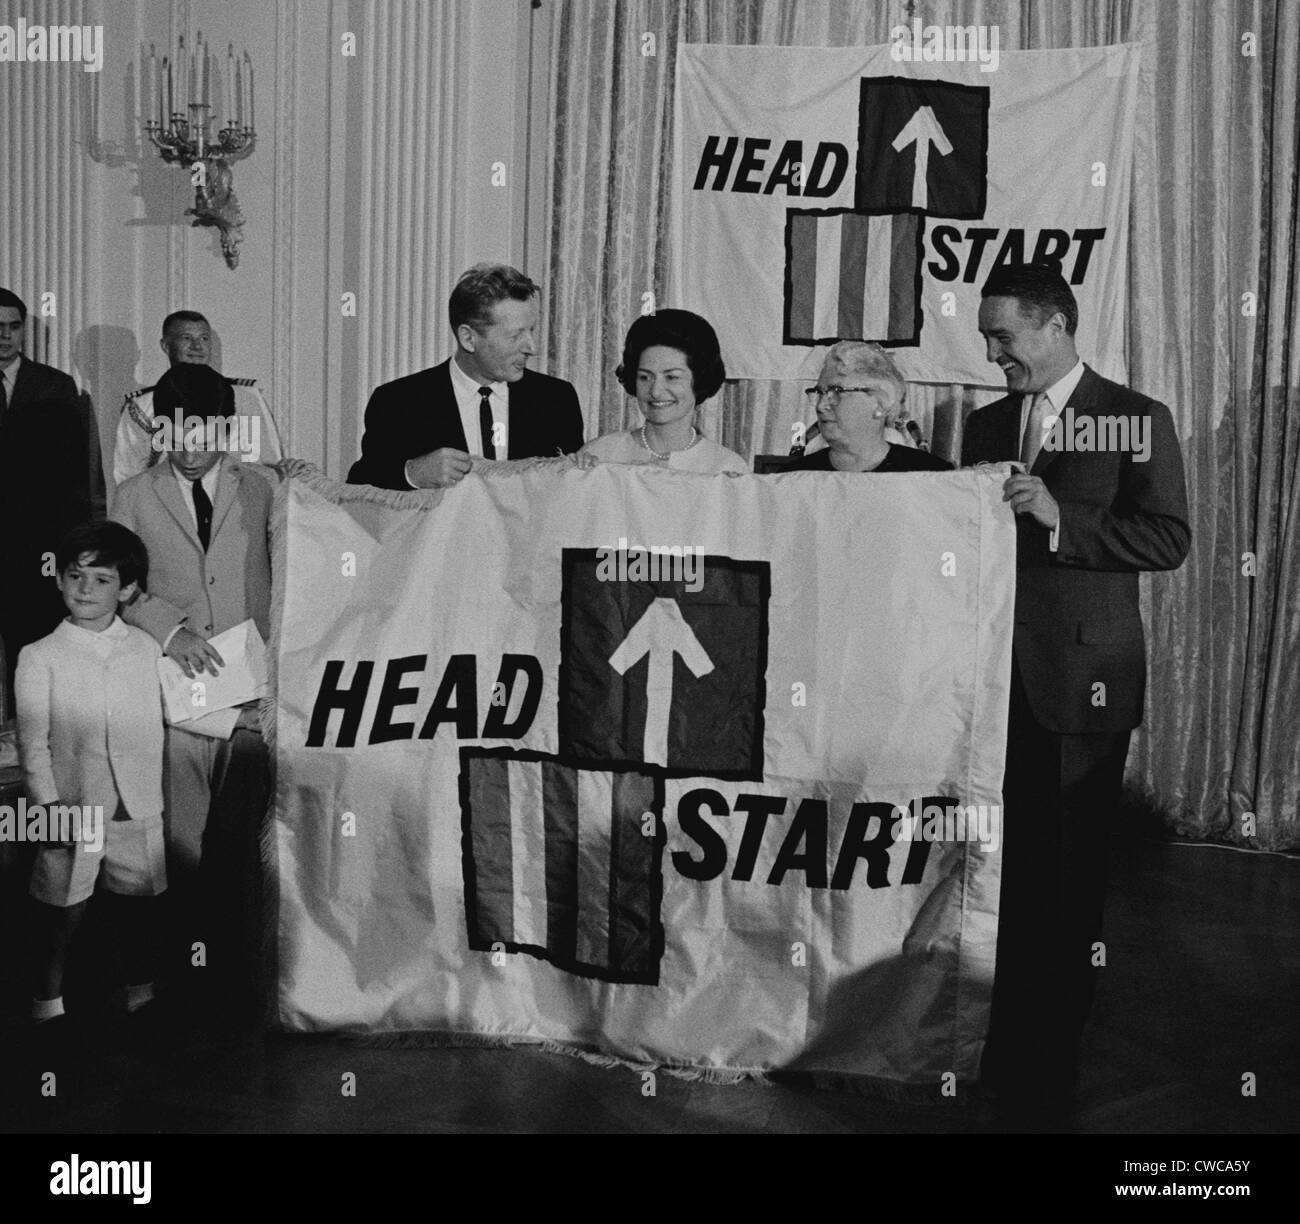 LBJ's Great Society programs. Ceremony for National Head Start program. Holding the sign are actor Danny Kaye, Lady Bird Stock Photo